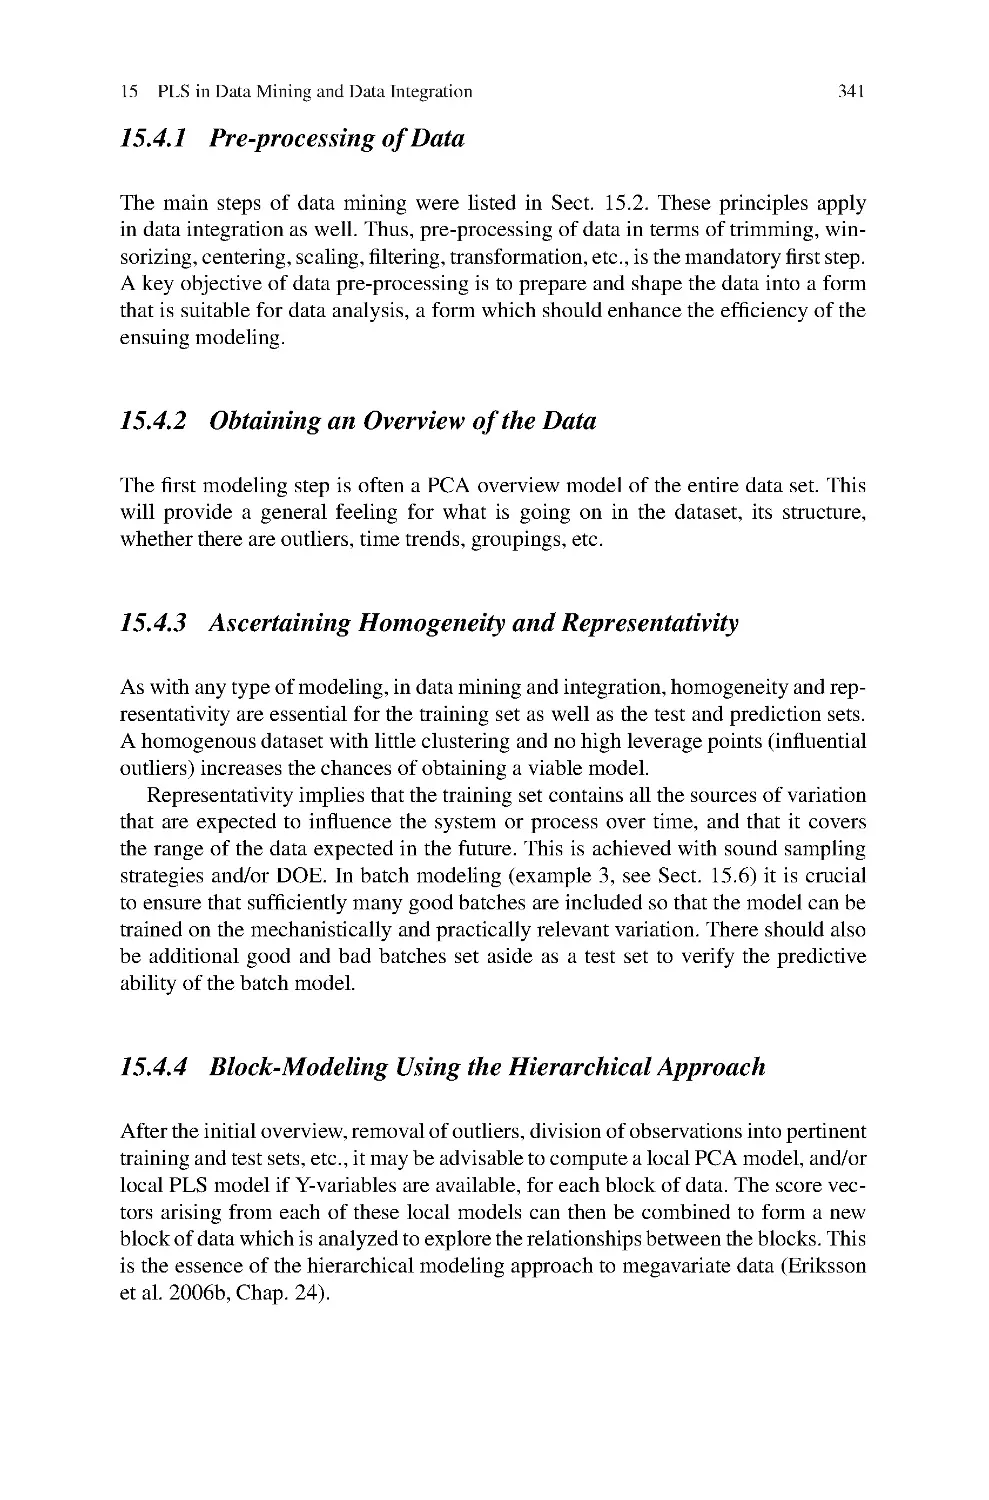 15.4.2 Obtaining an Overview of the Data
15.4.3 Ascertaining Homogeneity and Representativity
15.4.4 Block-Modeling Using the Hierarchical Approach